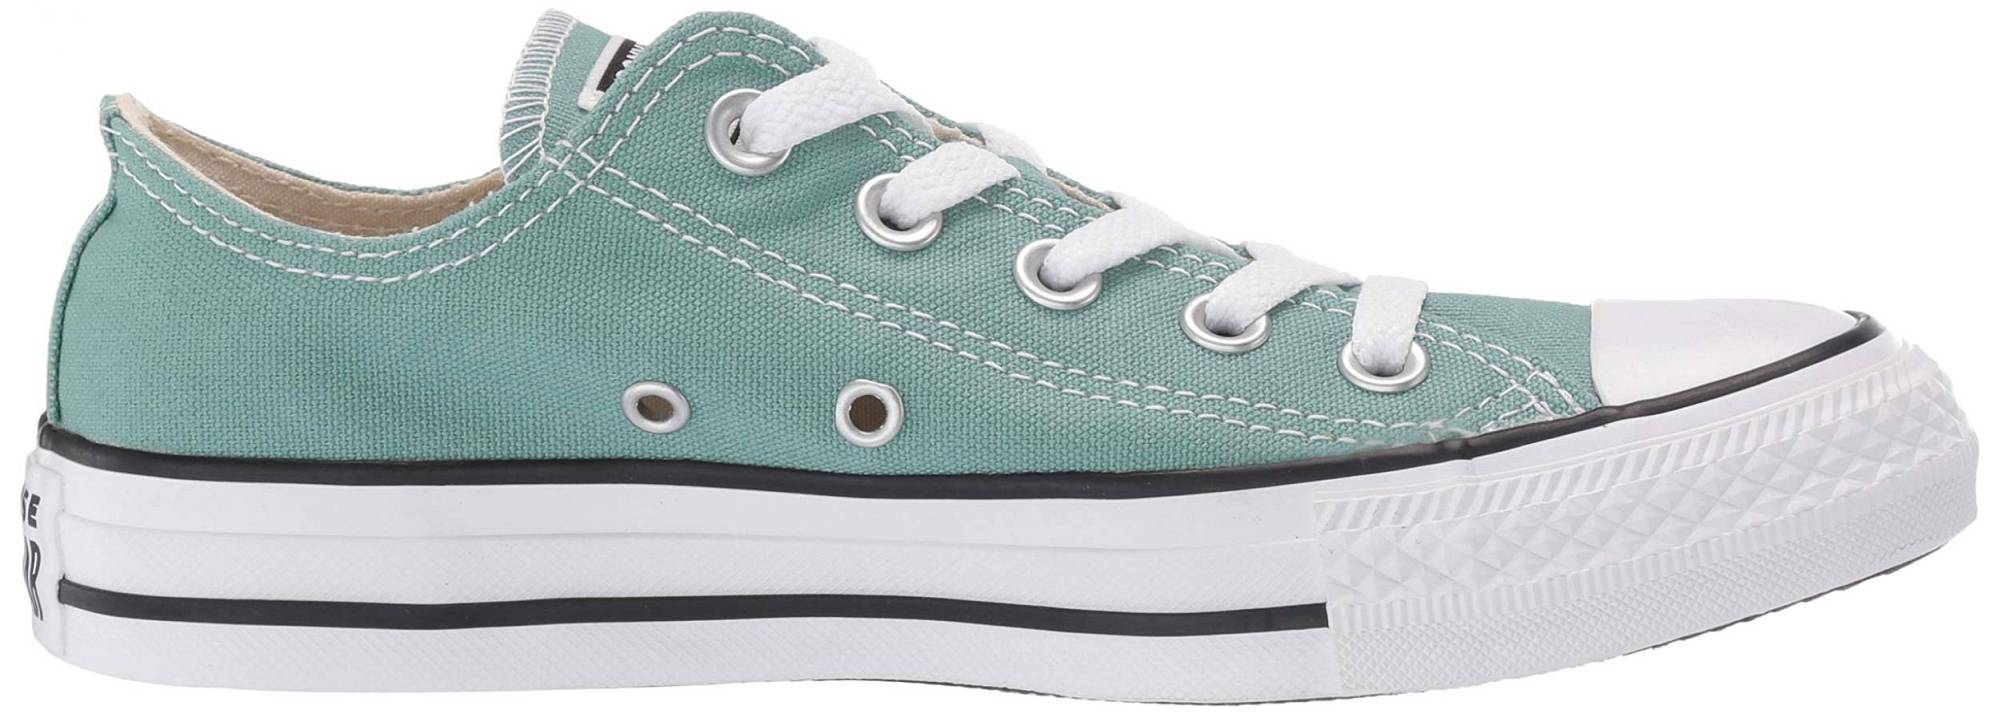 Converse Chuck Taylor All Star Seasonal Colors Low Top – Shoes Reviews ...